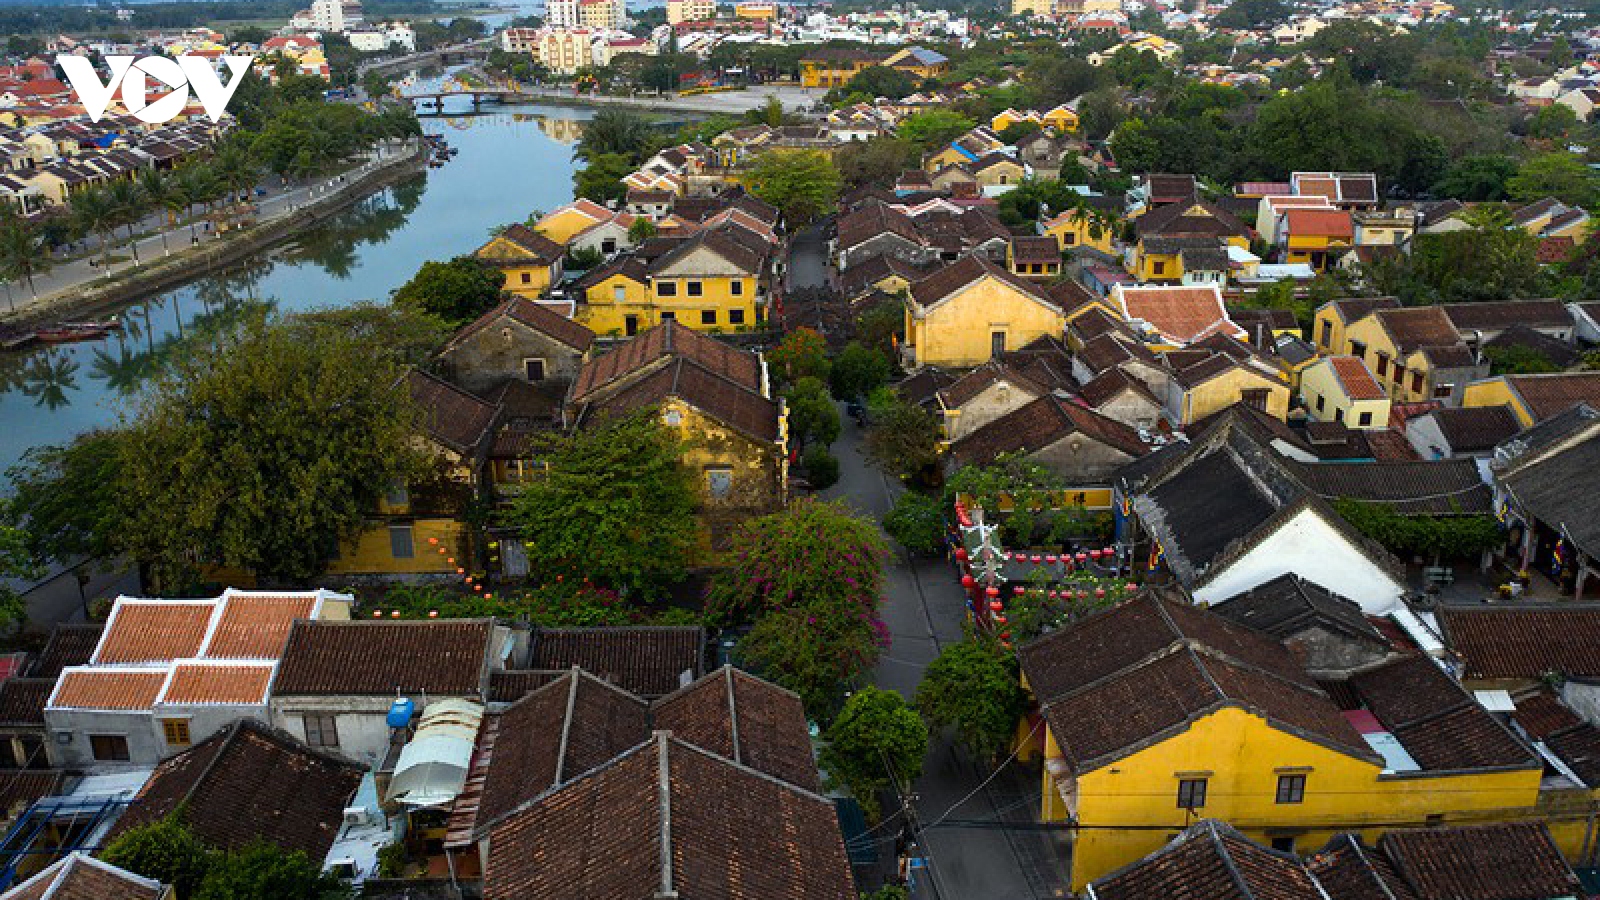 Hoi An listed among Top 10 best Asian cities to visit this year